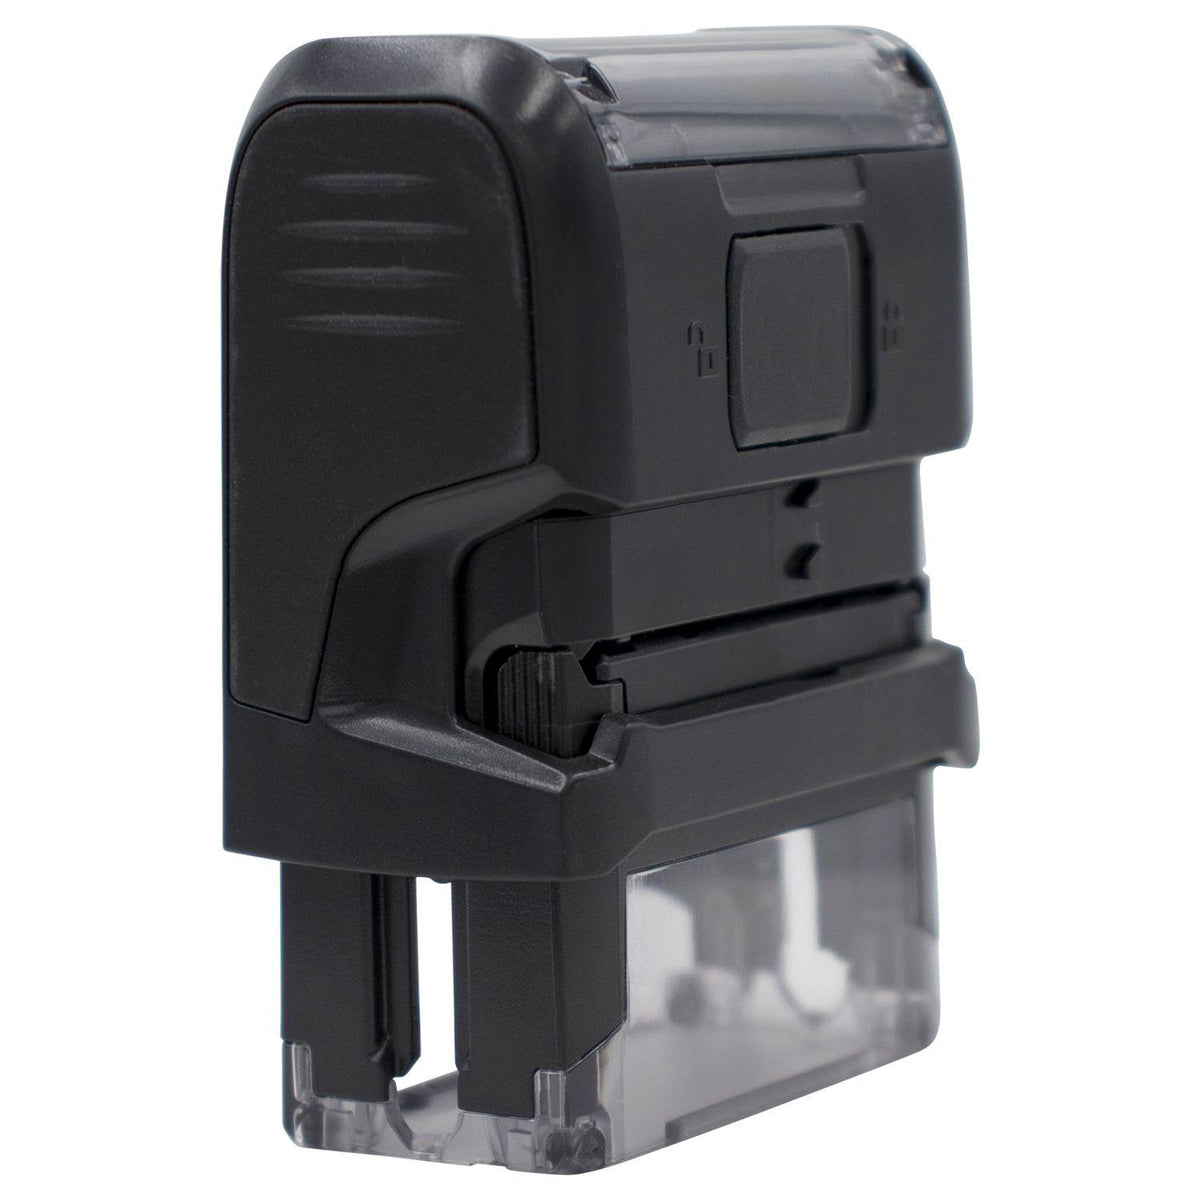 Large Self-Inking Standard Mail A Stamp - Engineer Seal Stamps - Brand_Trodat, Impression Size_Large, Stamp Type_Self-Inking Stamp, Type of Use_Postal &amp; Mailing